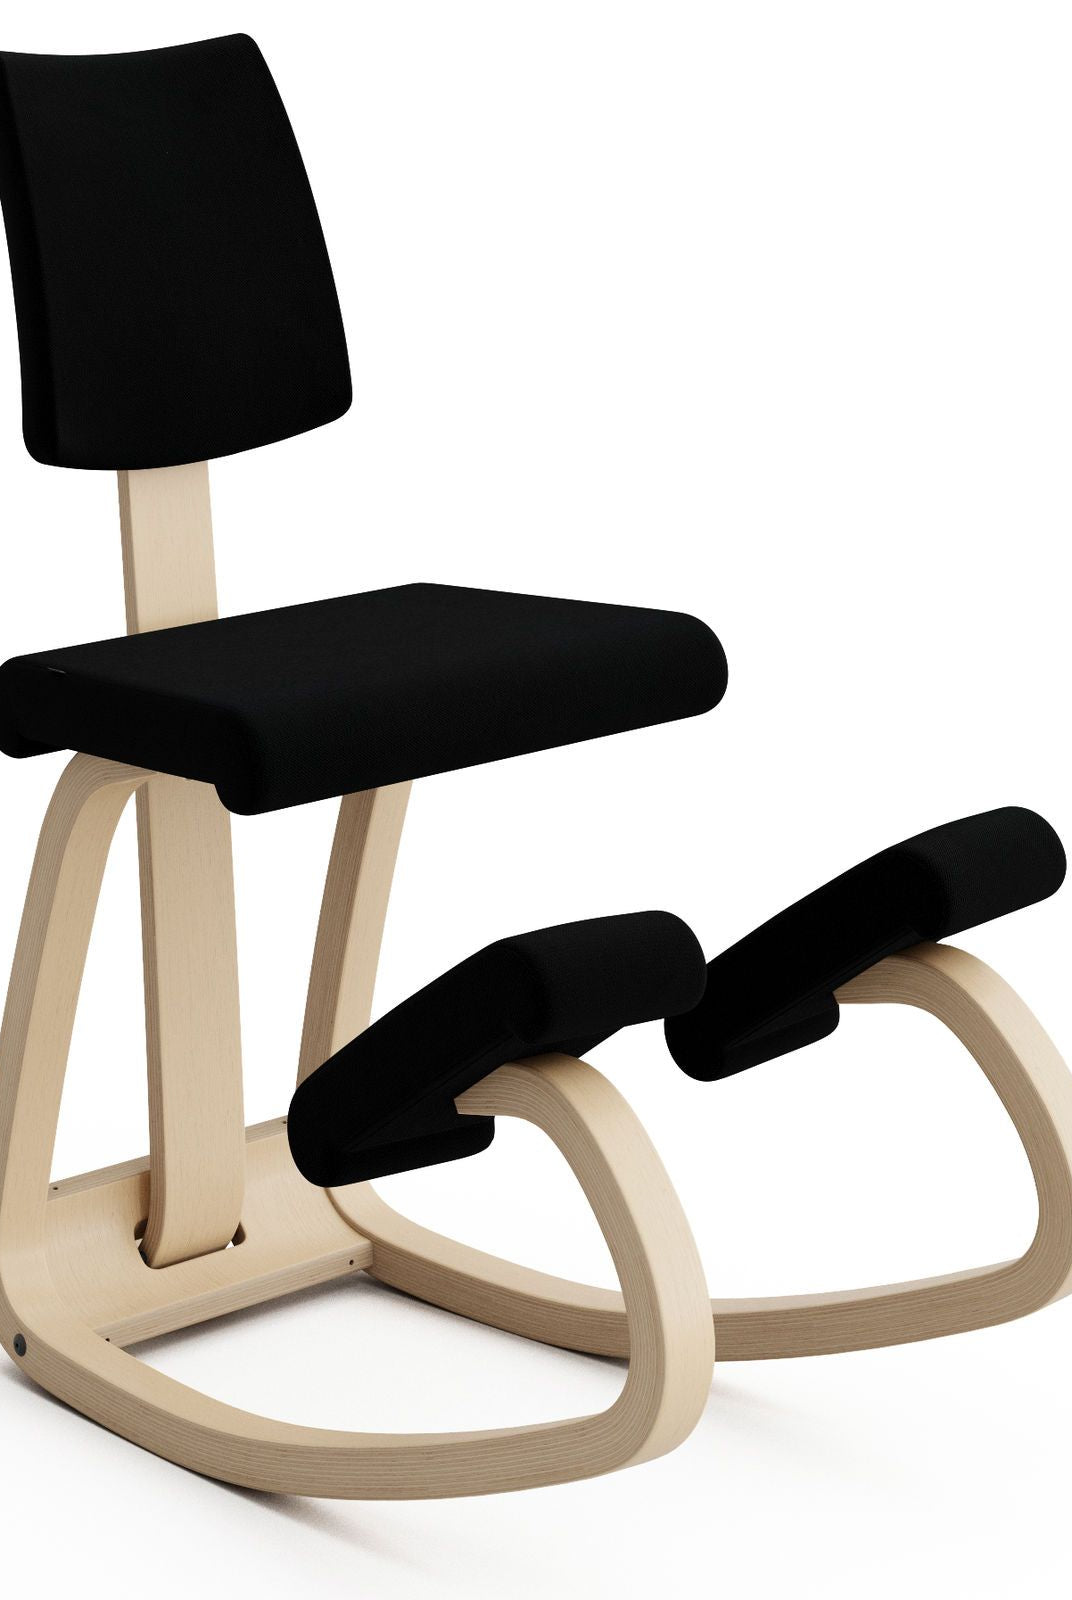 Varier Actulum Variable Plus balans chair from Active Goods Canada is an advanced balans with a fixed backrest with and upholstered cushion.